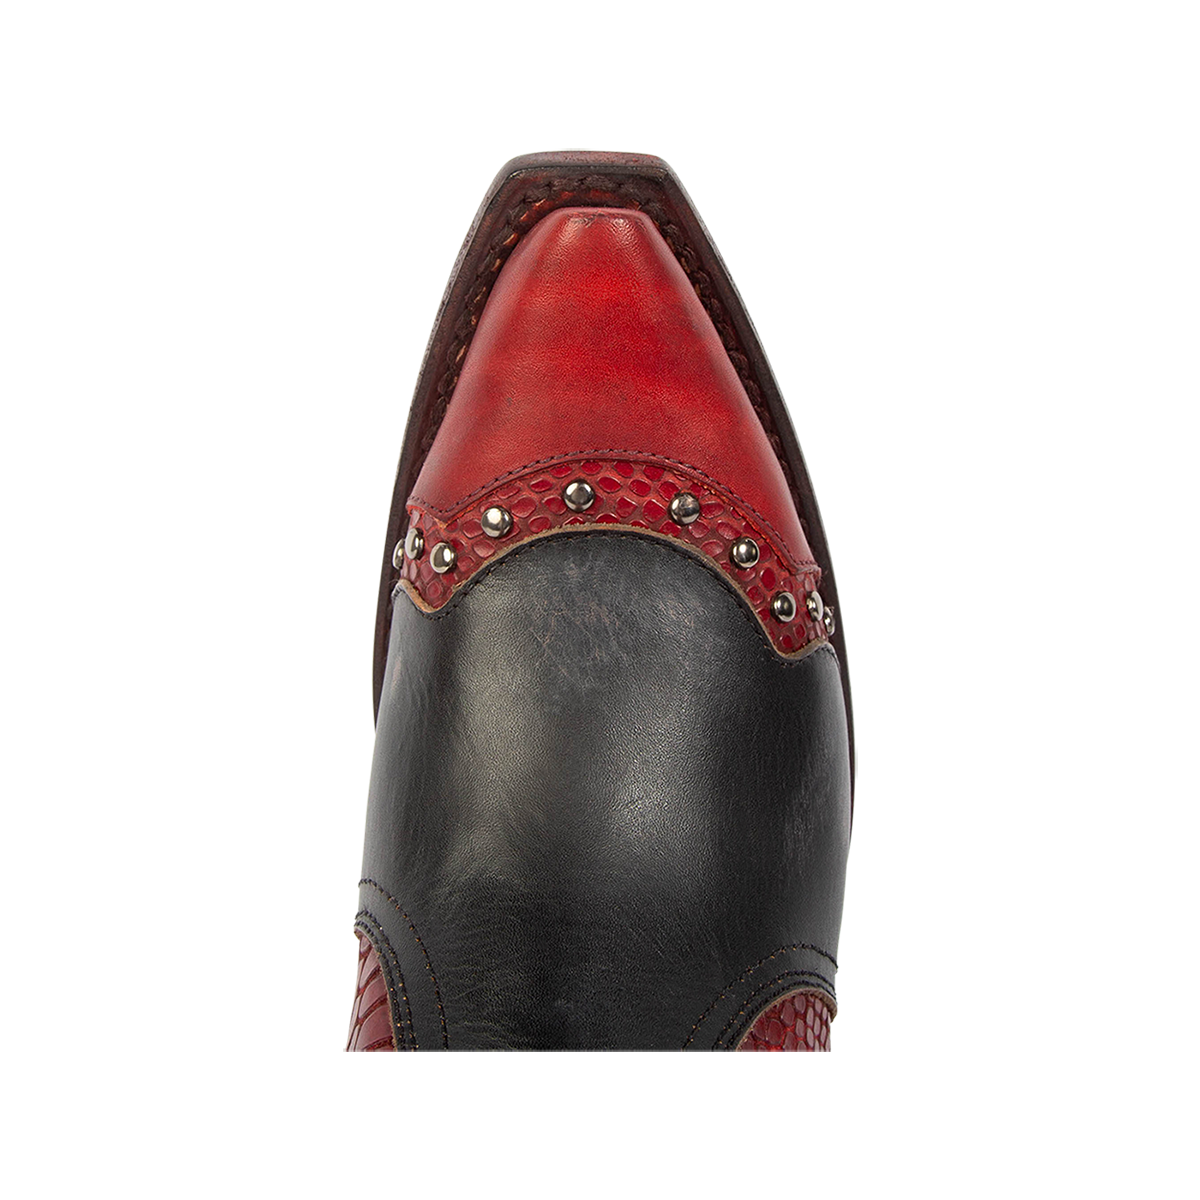 Top view showing snip toe construction with stud detailing on FREEBIRD women's Warner red multi leather western cowboy boot